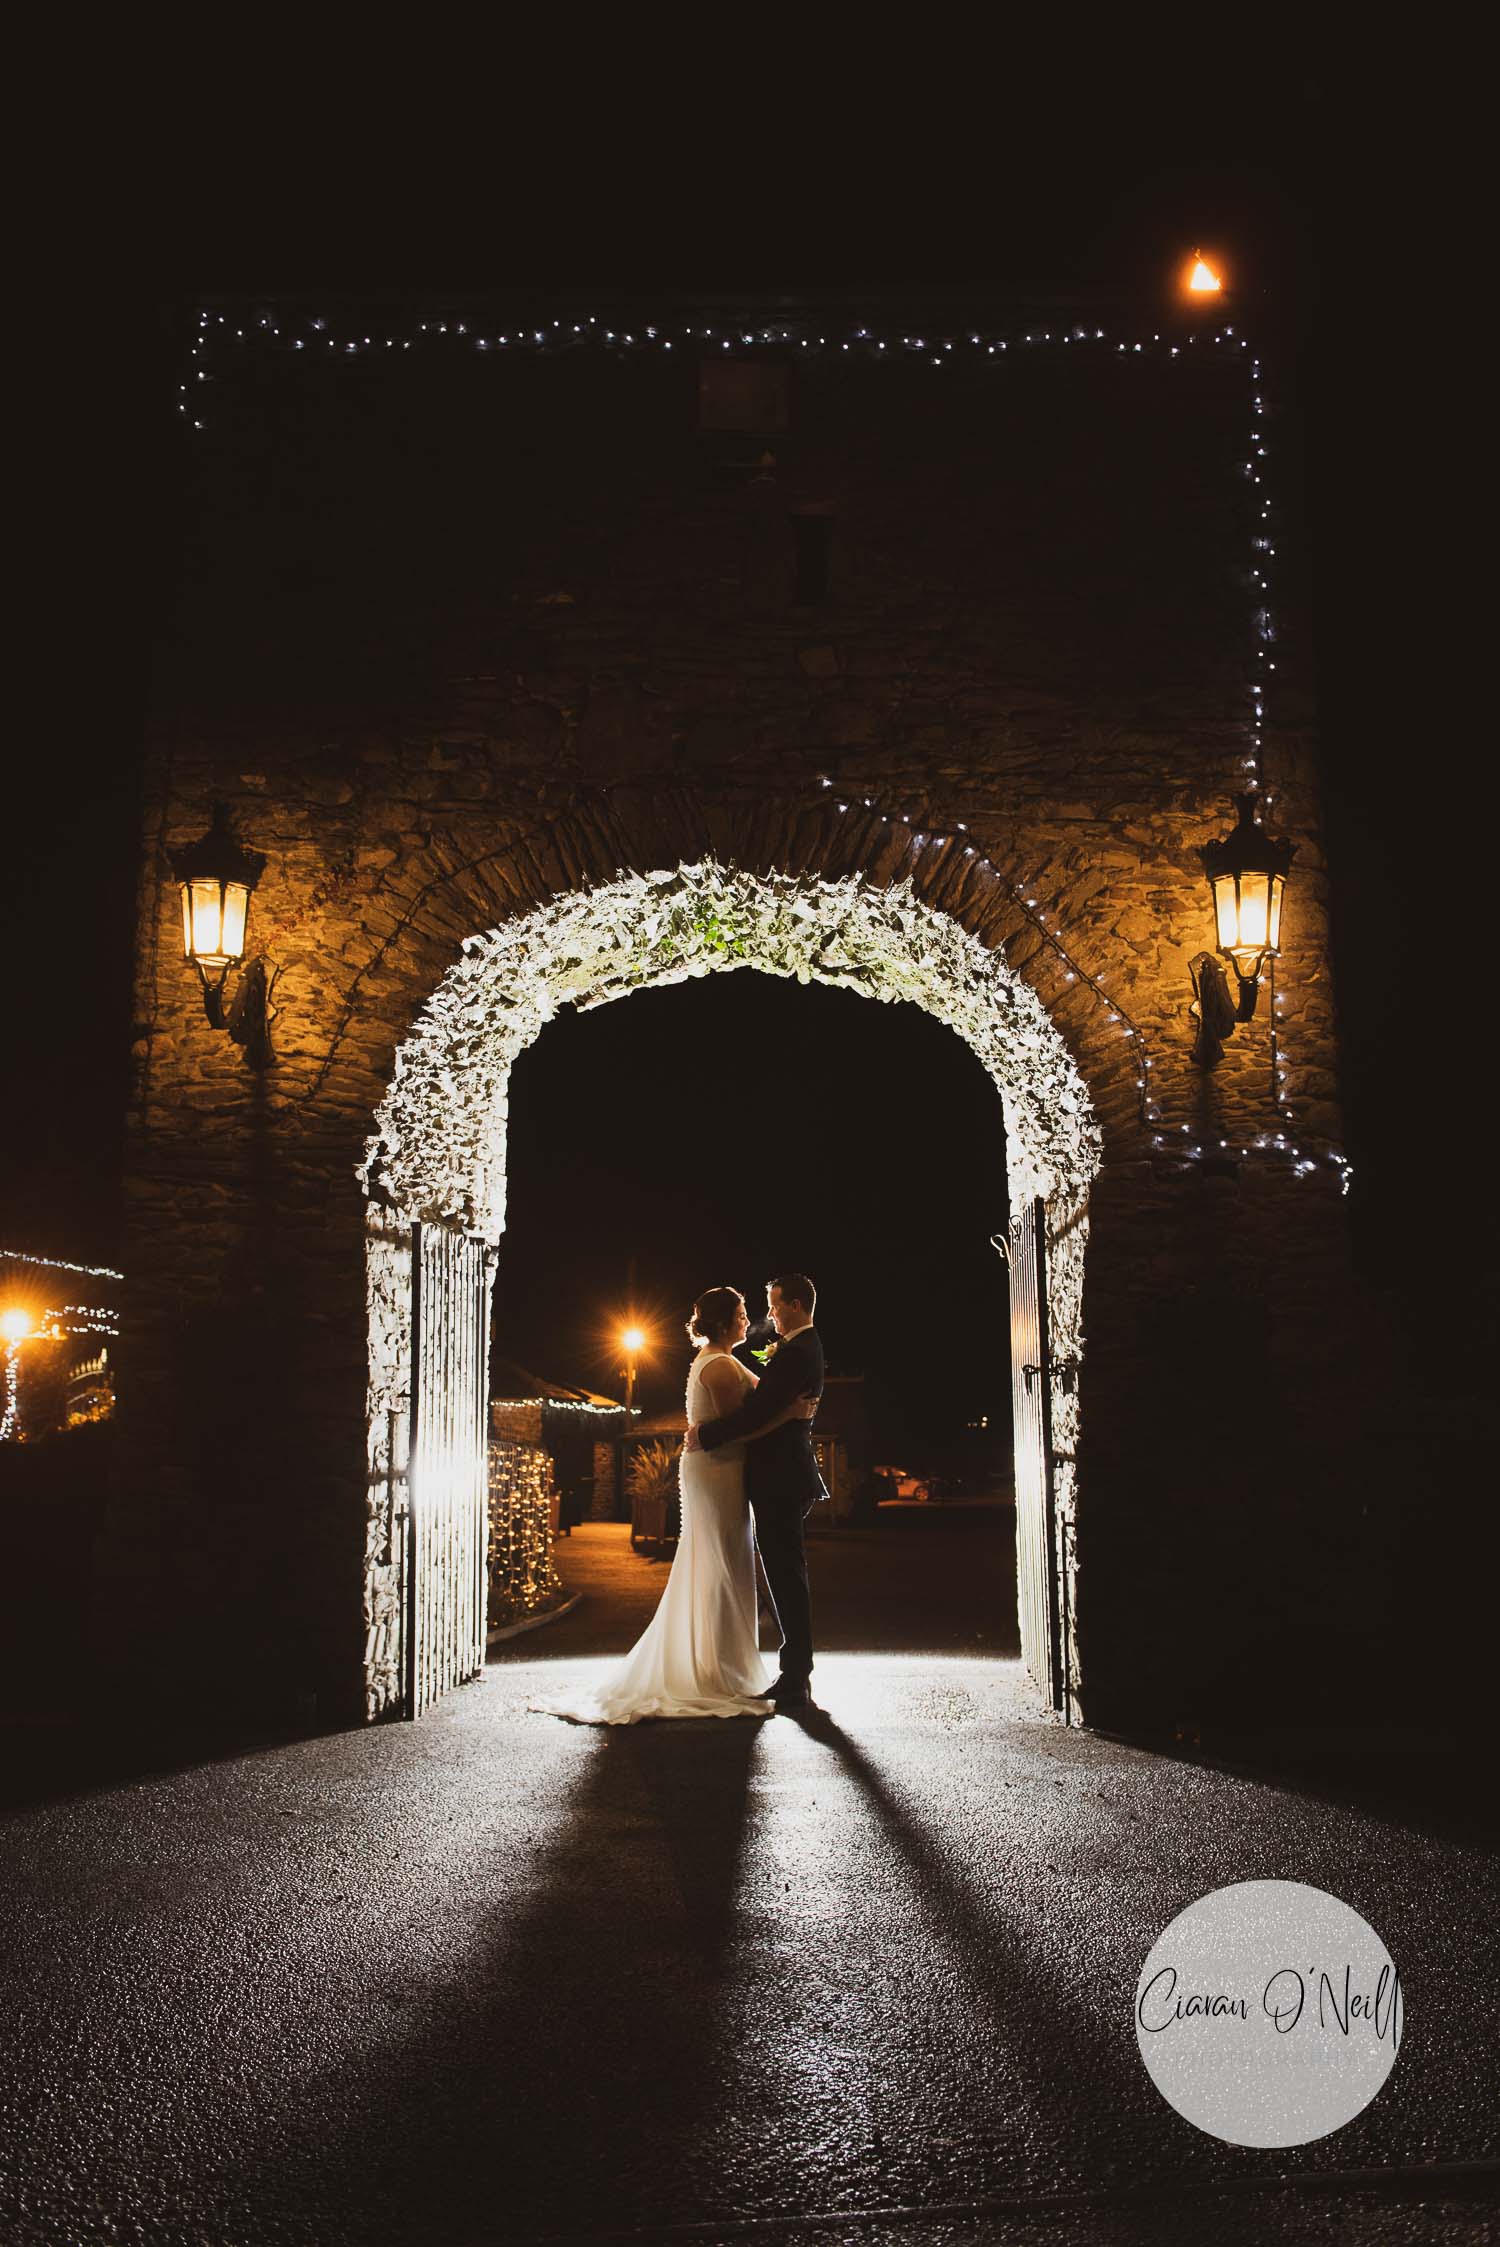 Bride and groom under an arch after dark lit from behind